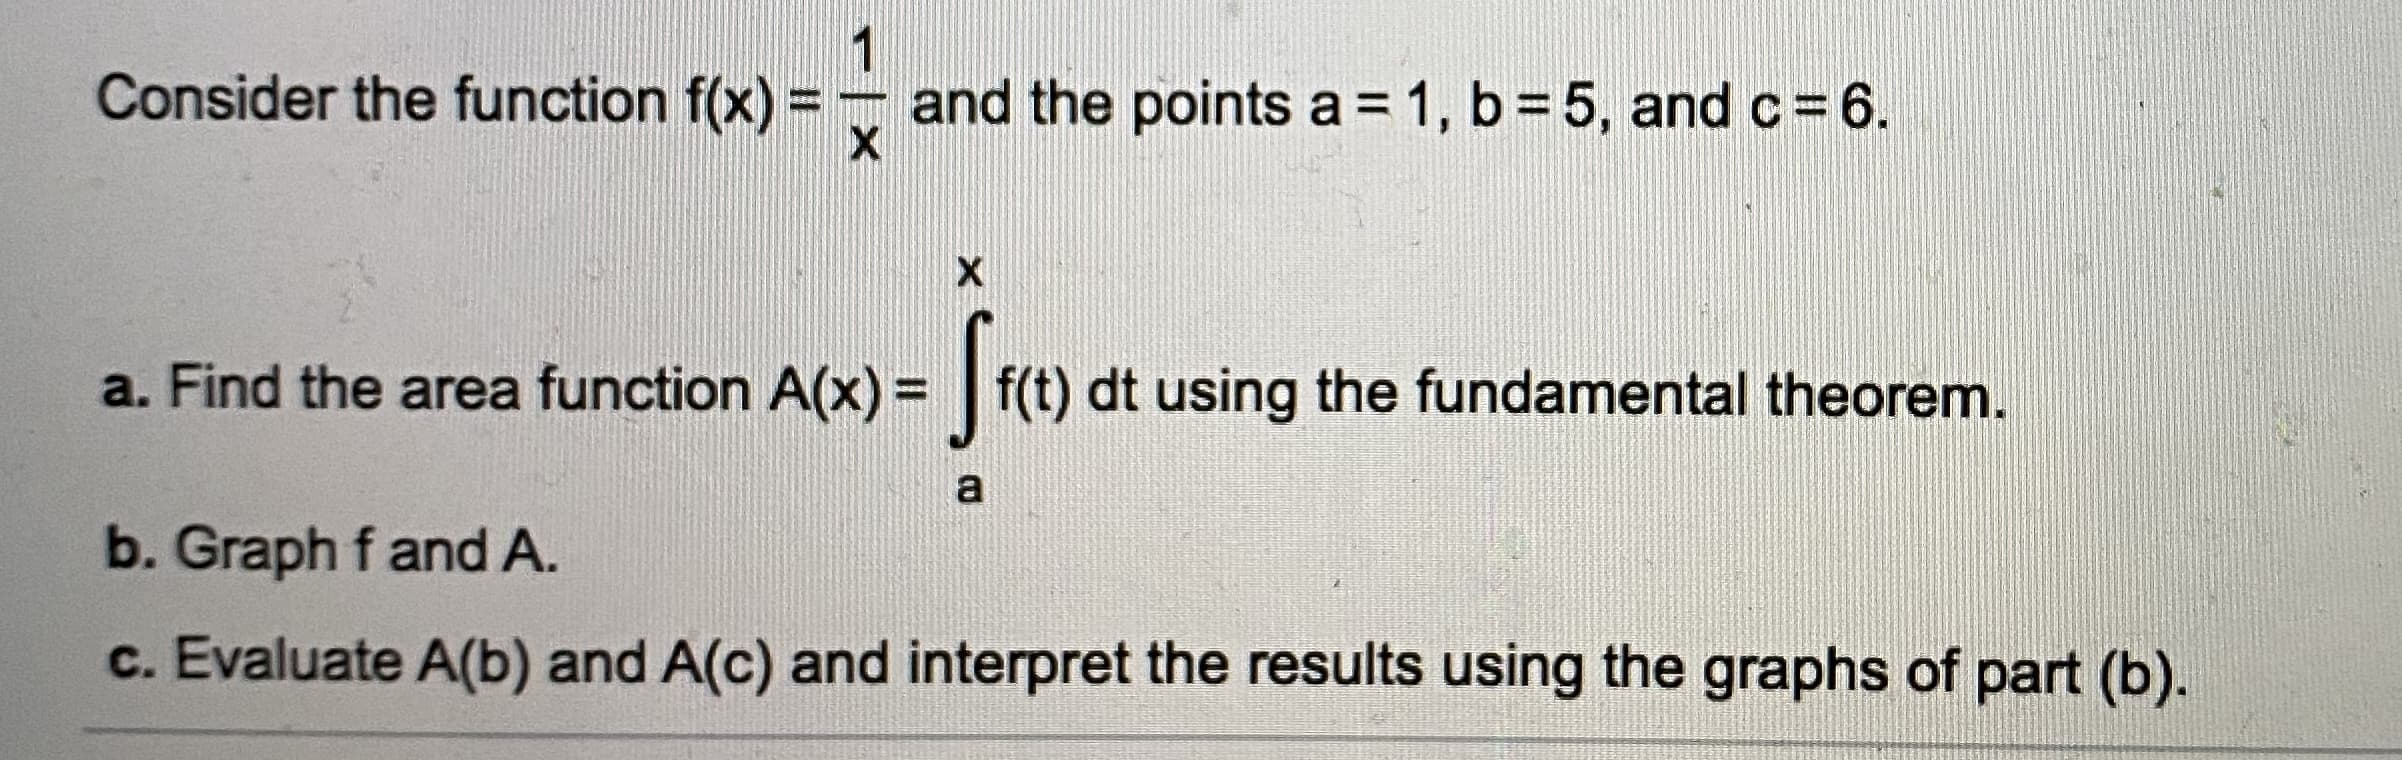 Consider the function f(x) = - and the points a = 1, b = 5, and c=6.
a. Find the area function A(x) = | f(t) dt using the fundamental theorem.
b. Graph f and A.
c. Evaluate A(b) and A(c) and interpret the results using the graphs of part (b).
